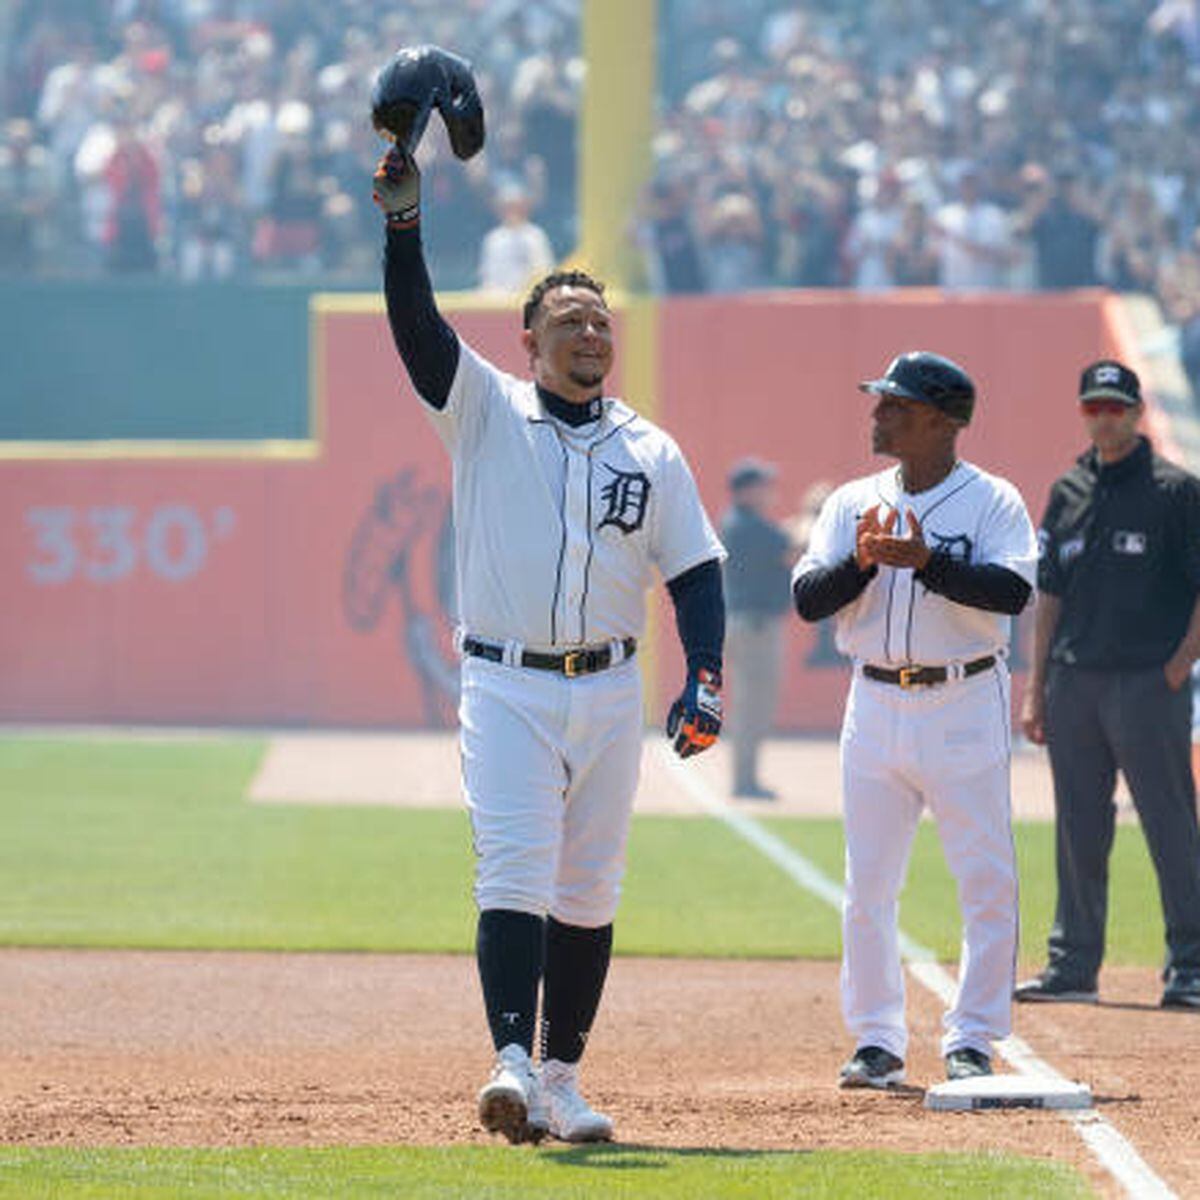 Miguel Cabrera gets his 3,000th career hit, becoming the 33rd